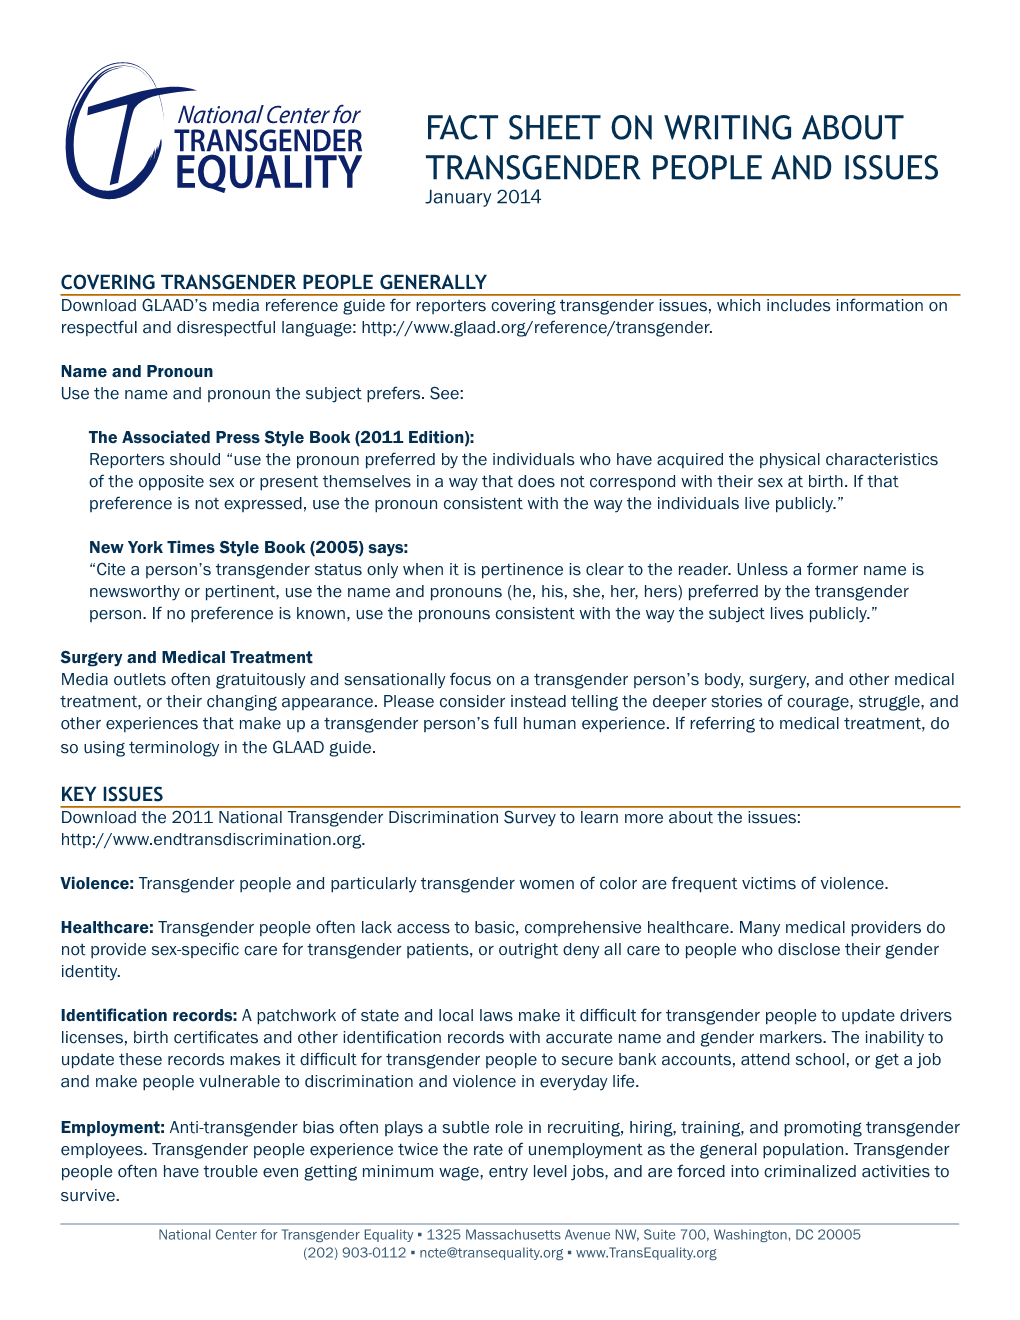 FACT SHEET on WRITING ABOUT TRANSGENDER PEOPLE and ISSUES January 2014